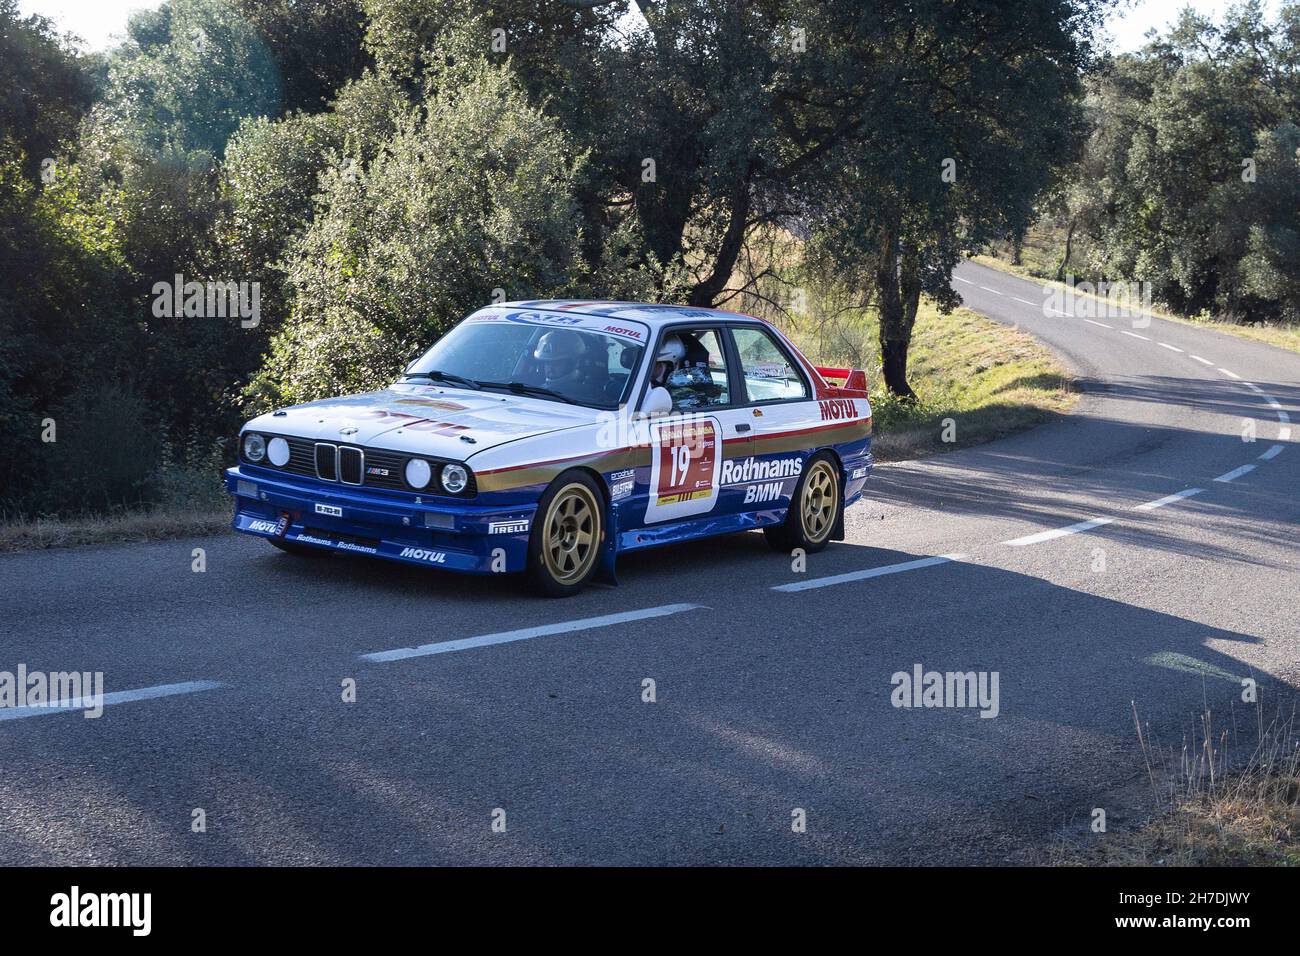 BMW M3 taking part in the timed section of the Rally Costa Brava 2021 in Girona, Spain Stock Photo